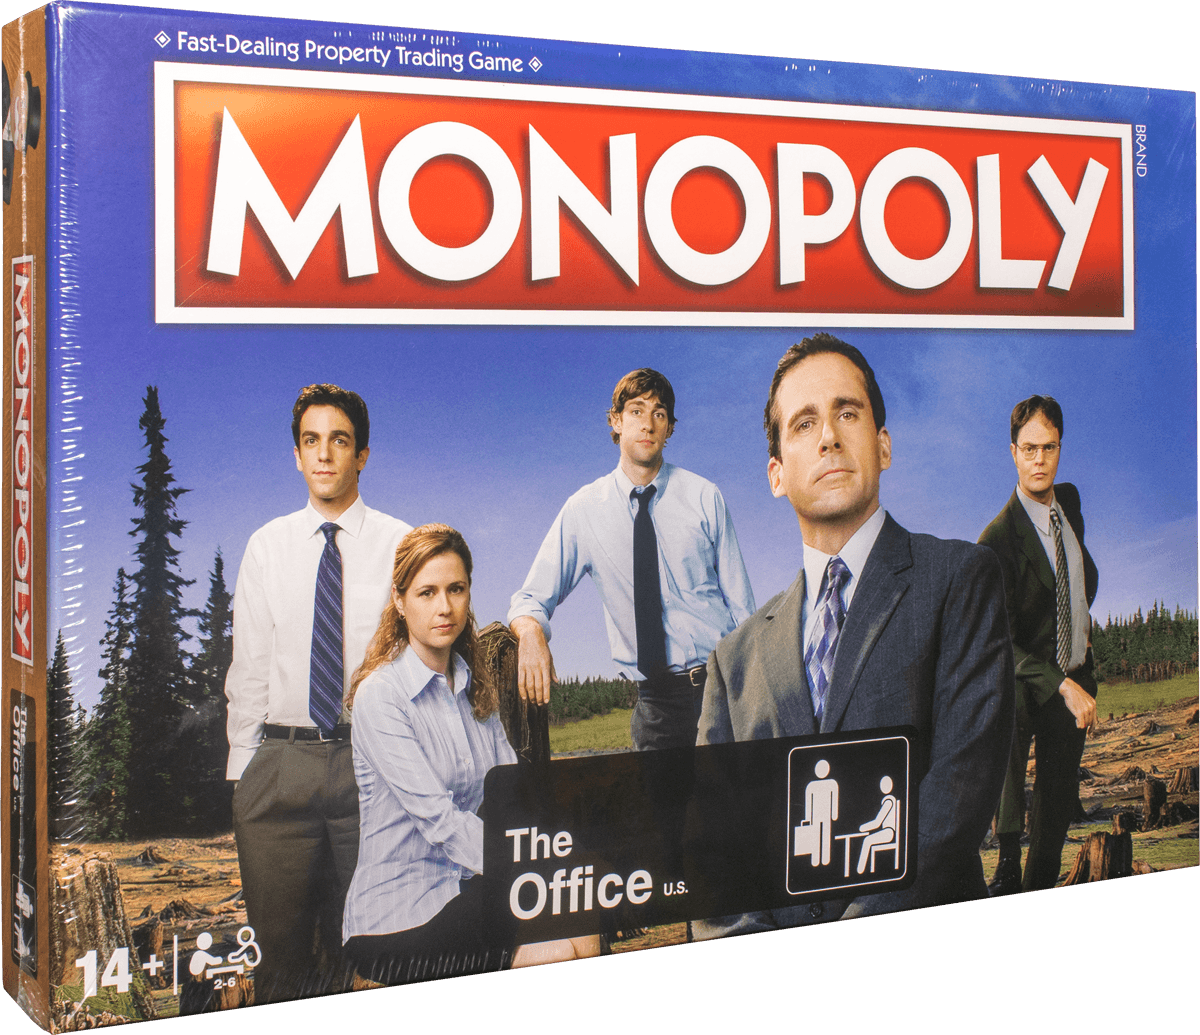 WINWM03010 Monopoly - The Office Edition - Winning Moves - Titan Pop Culture